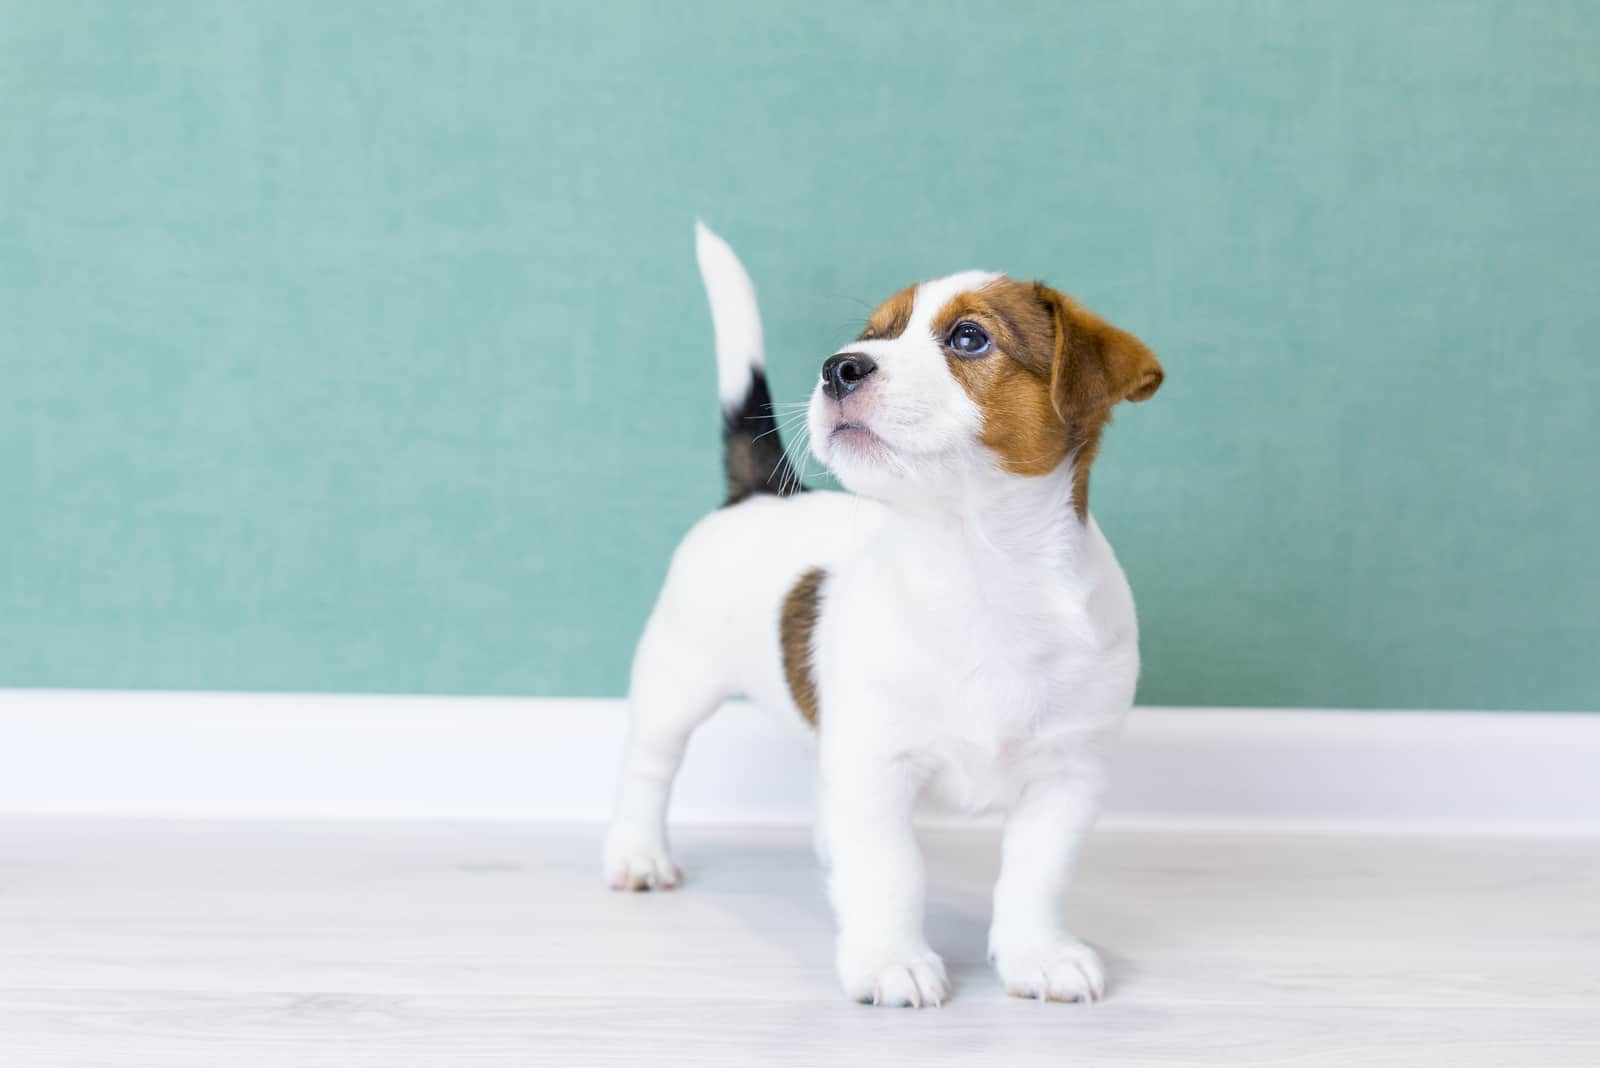 Dog Tail Position Chart: A Guide To Dog’s Body Language